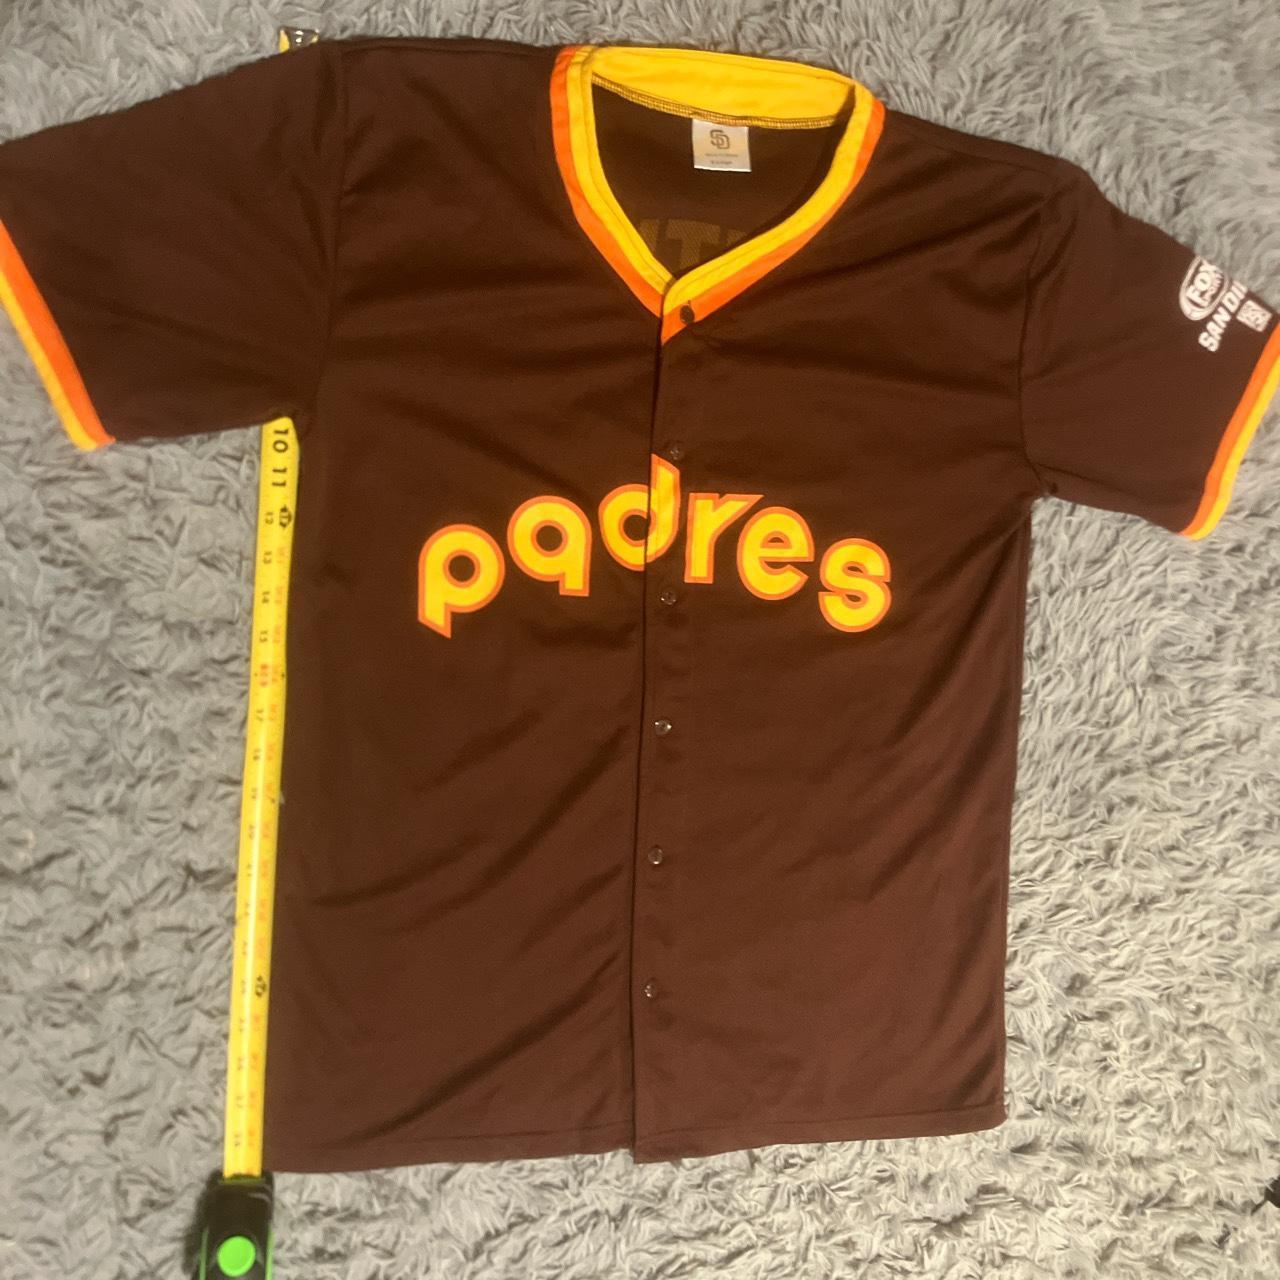 Padres wore brown tops on the road from 1976–1984